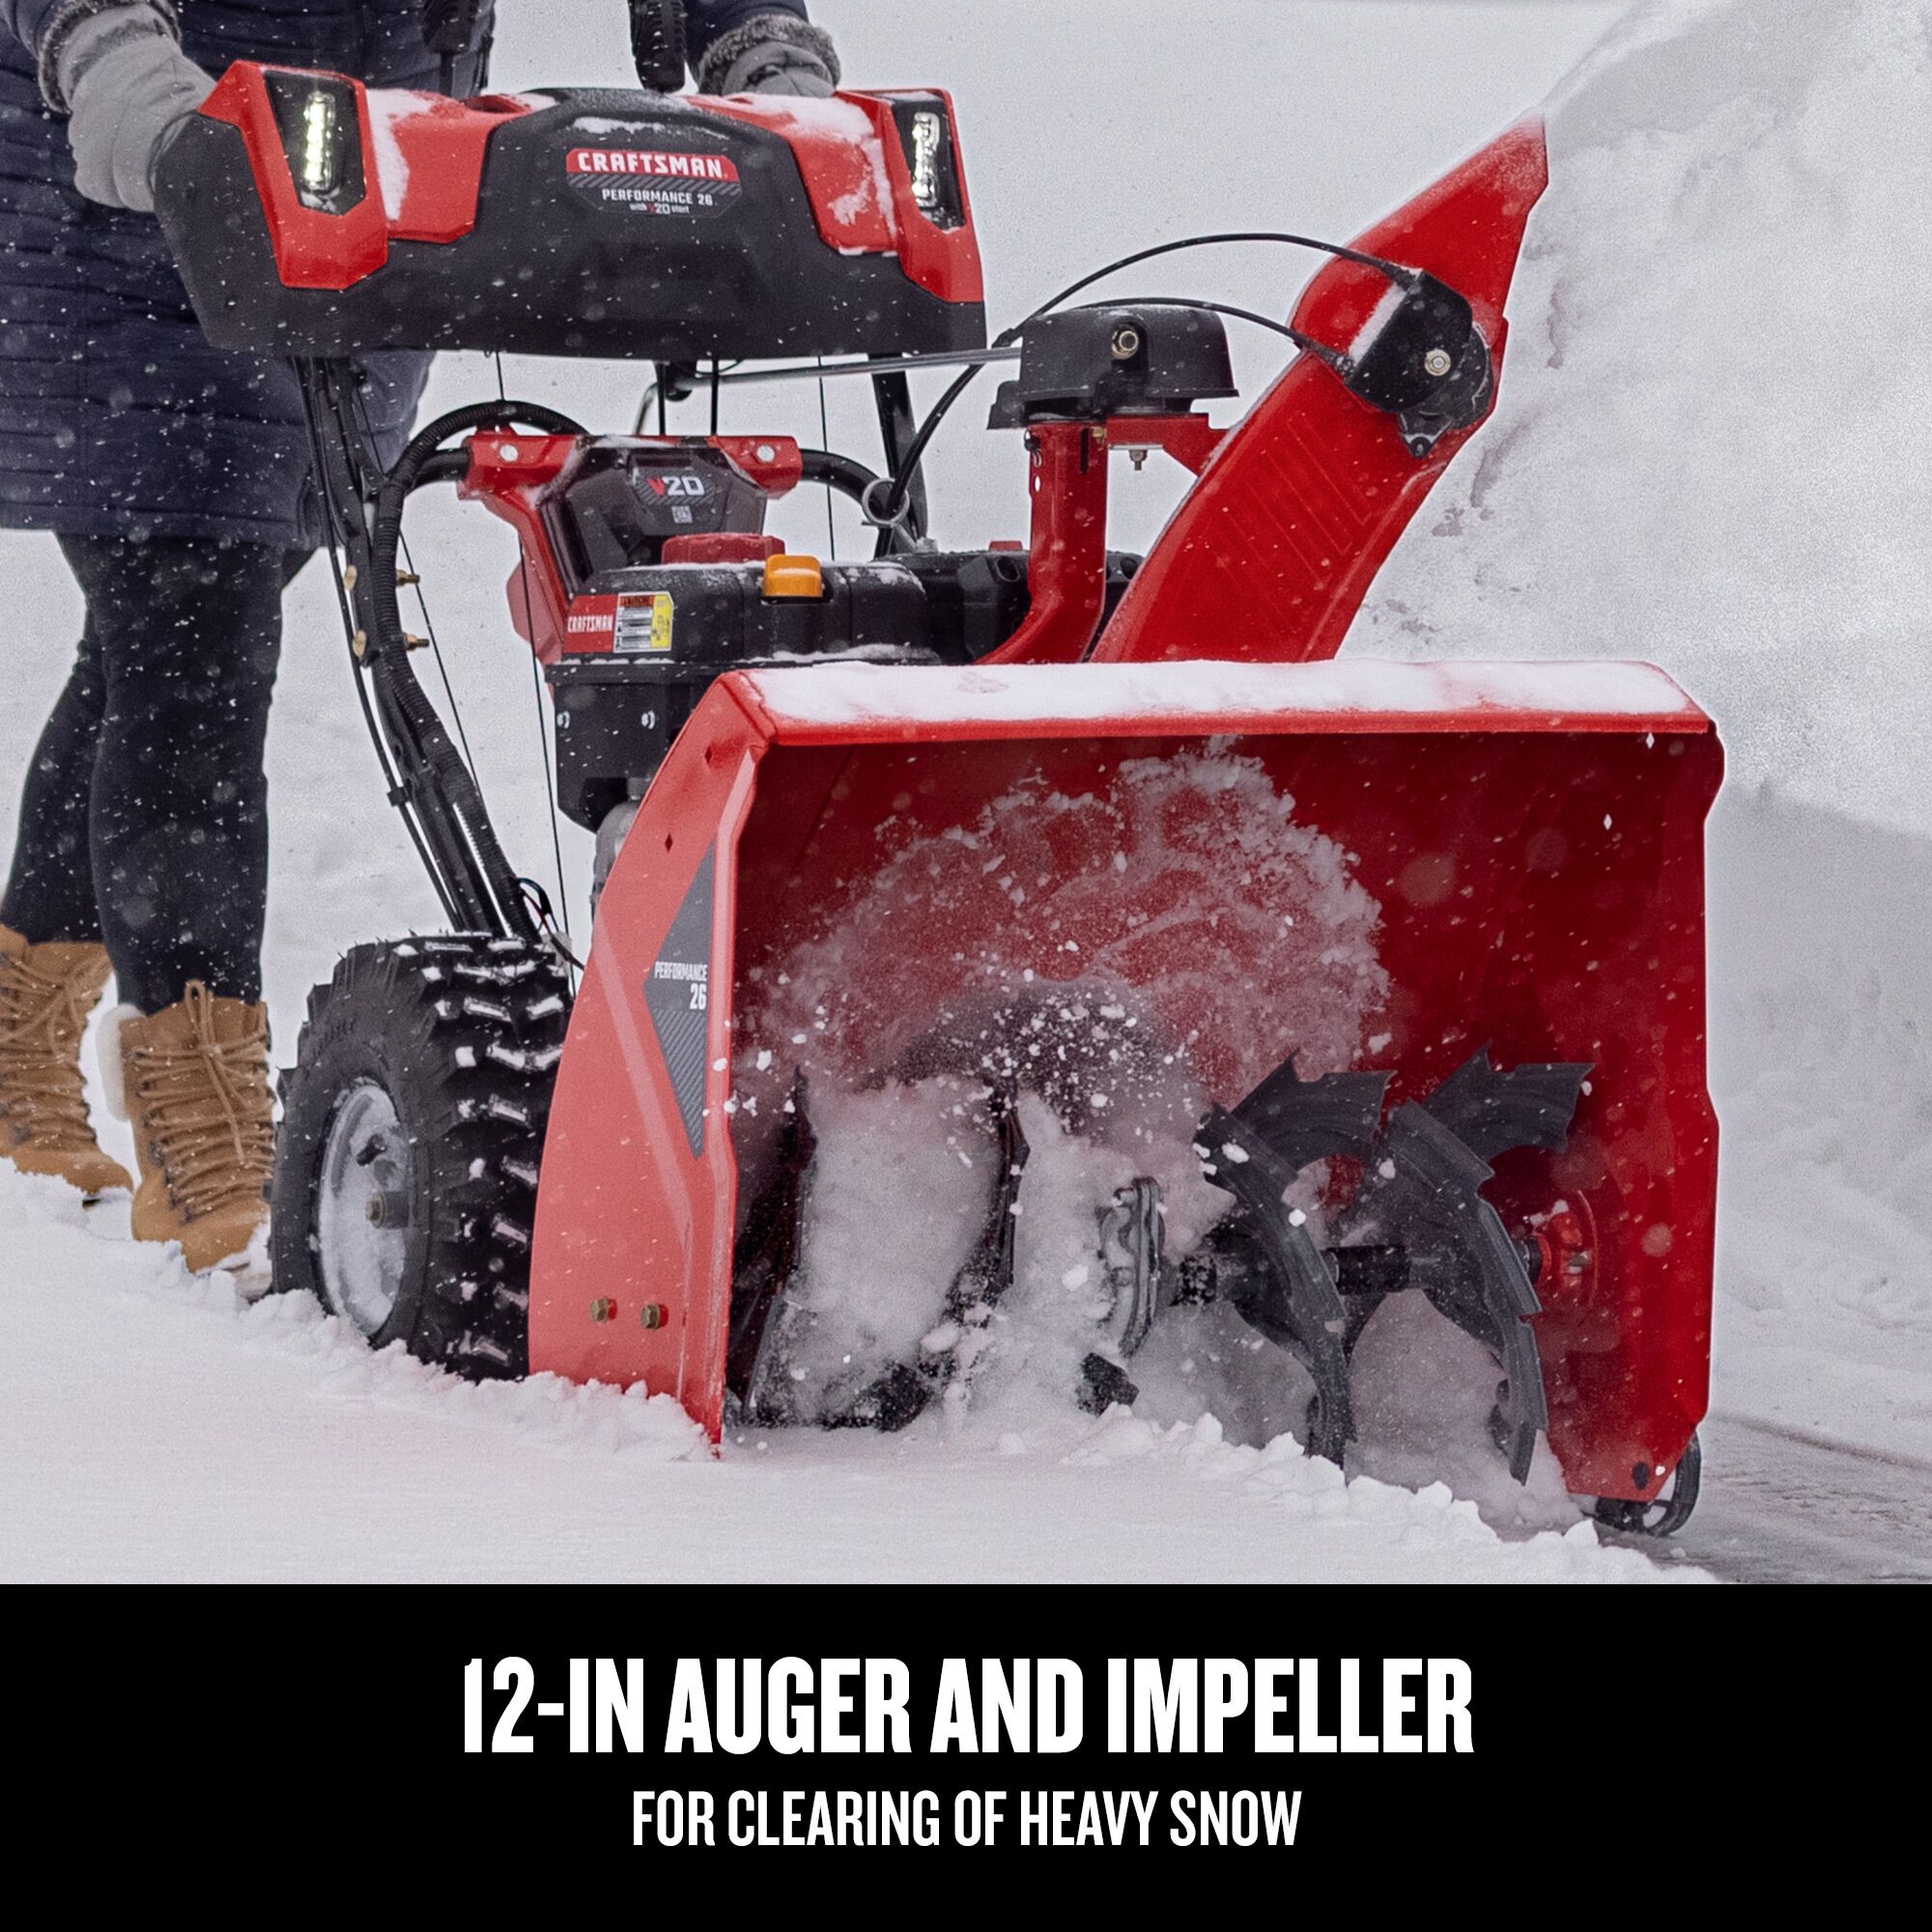 CRAFTSMAN V20* Start 26-in. 243-cc Two Stage Gas Snow Blower focused in on auger and impeller